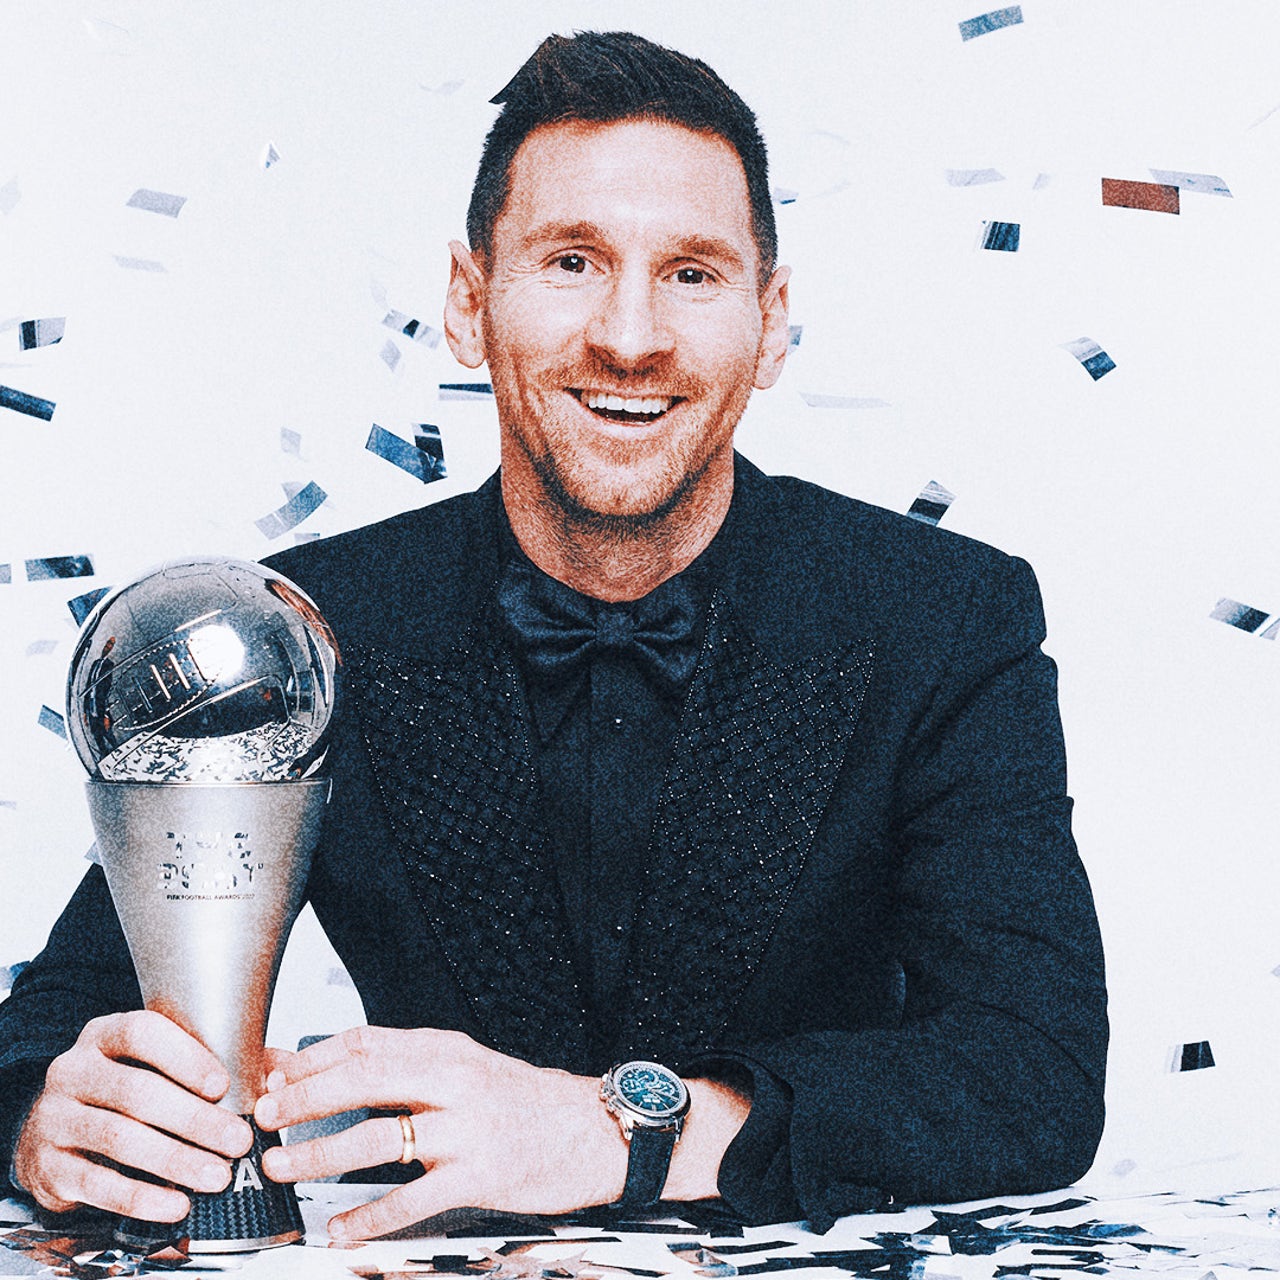 Lionel Messi earns Leagues Cup 2023 Top Scorer And Best Player Award